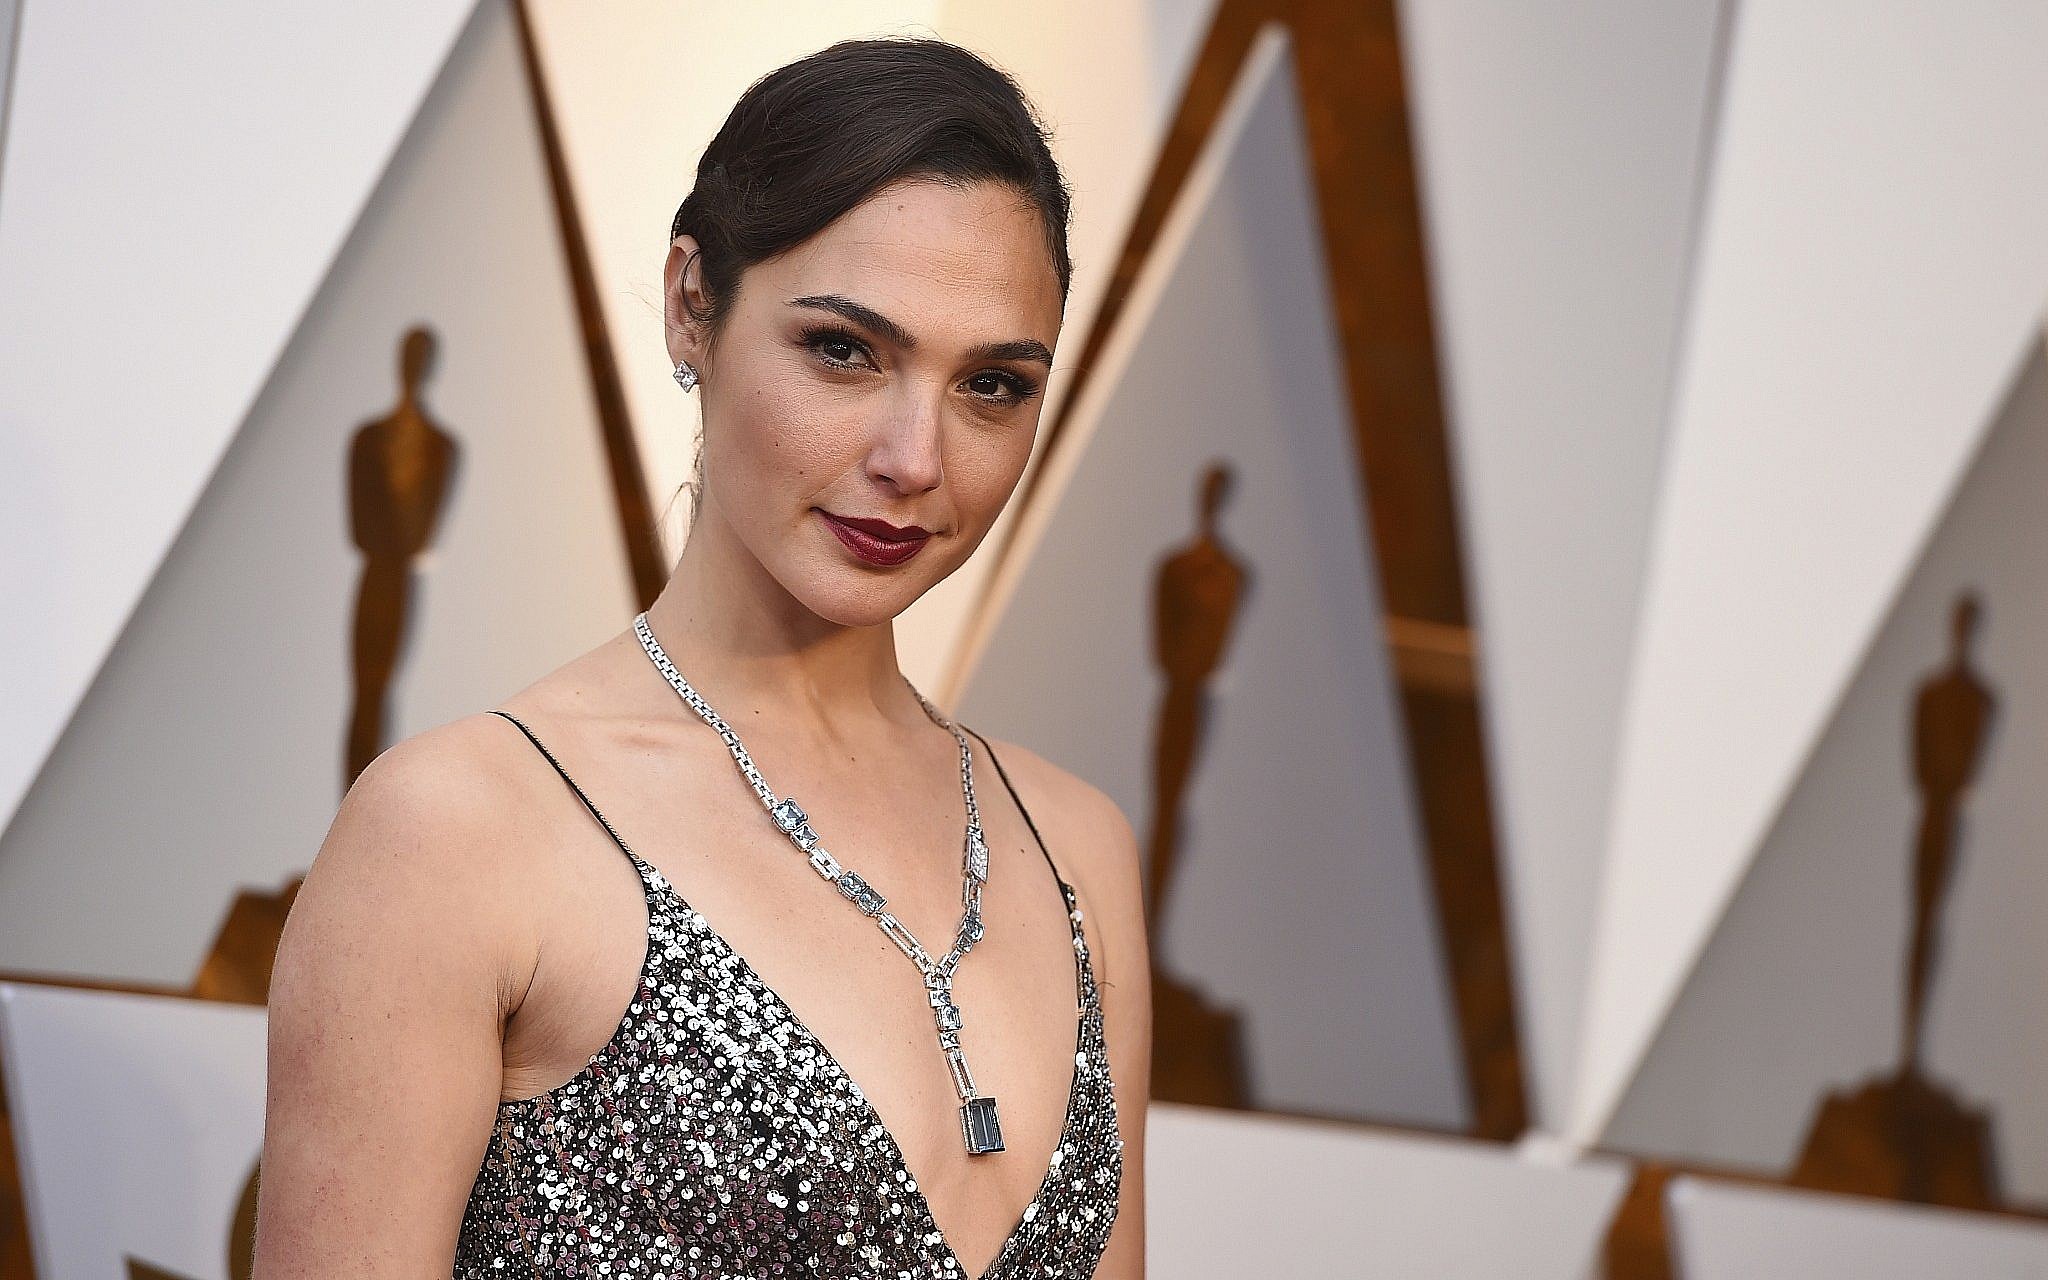 Gal Gadot said eyeing role in series about Jewish actress, inventor